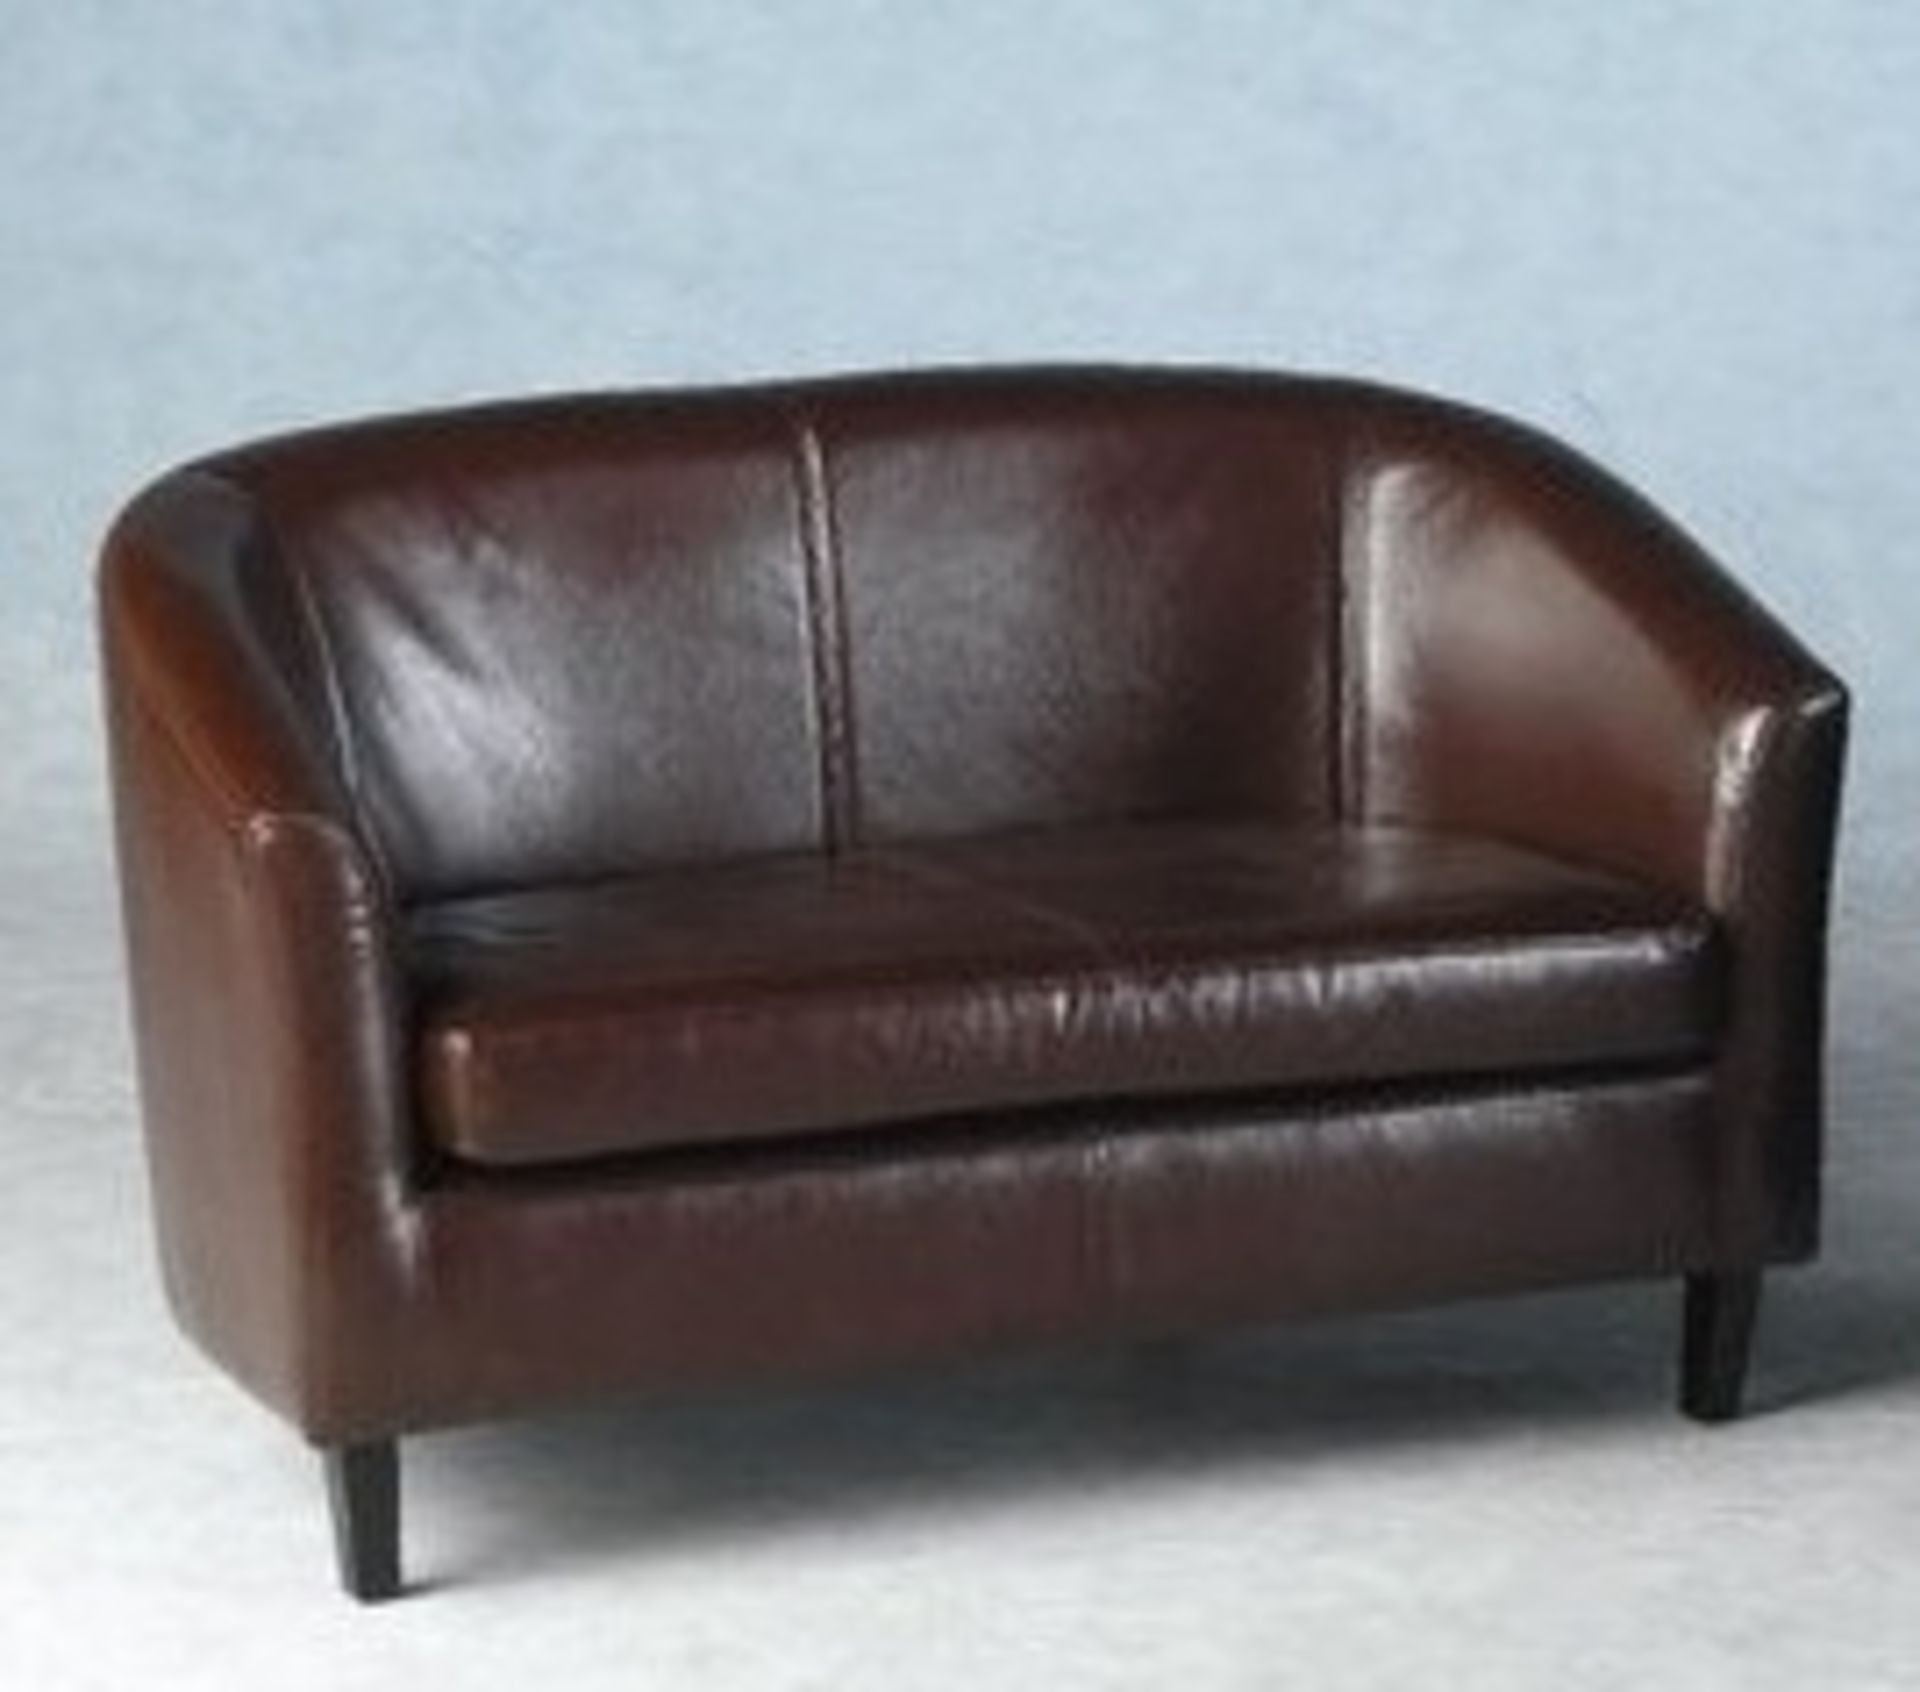 Brown faux leather 2 seater tub sofa with dark brown wooden legs